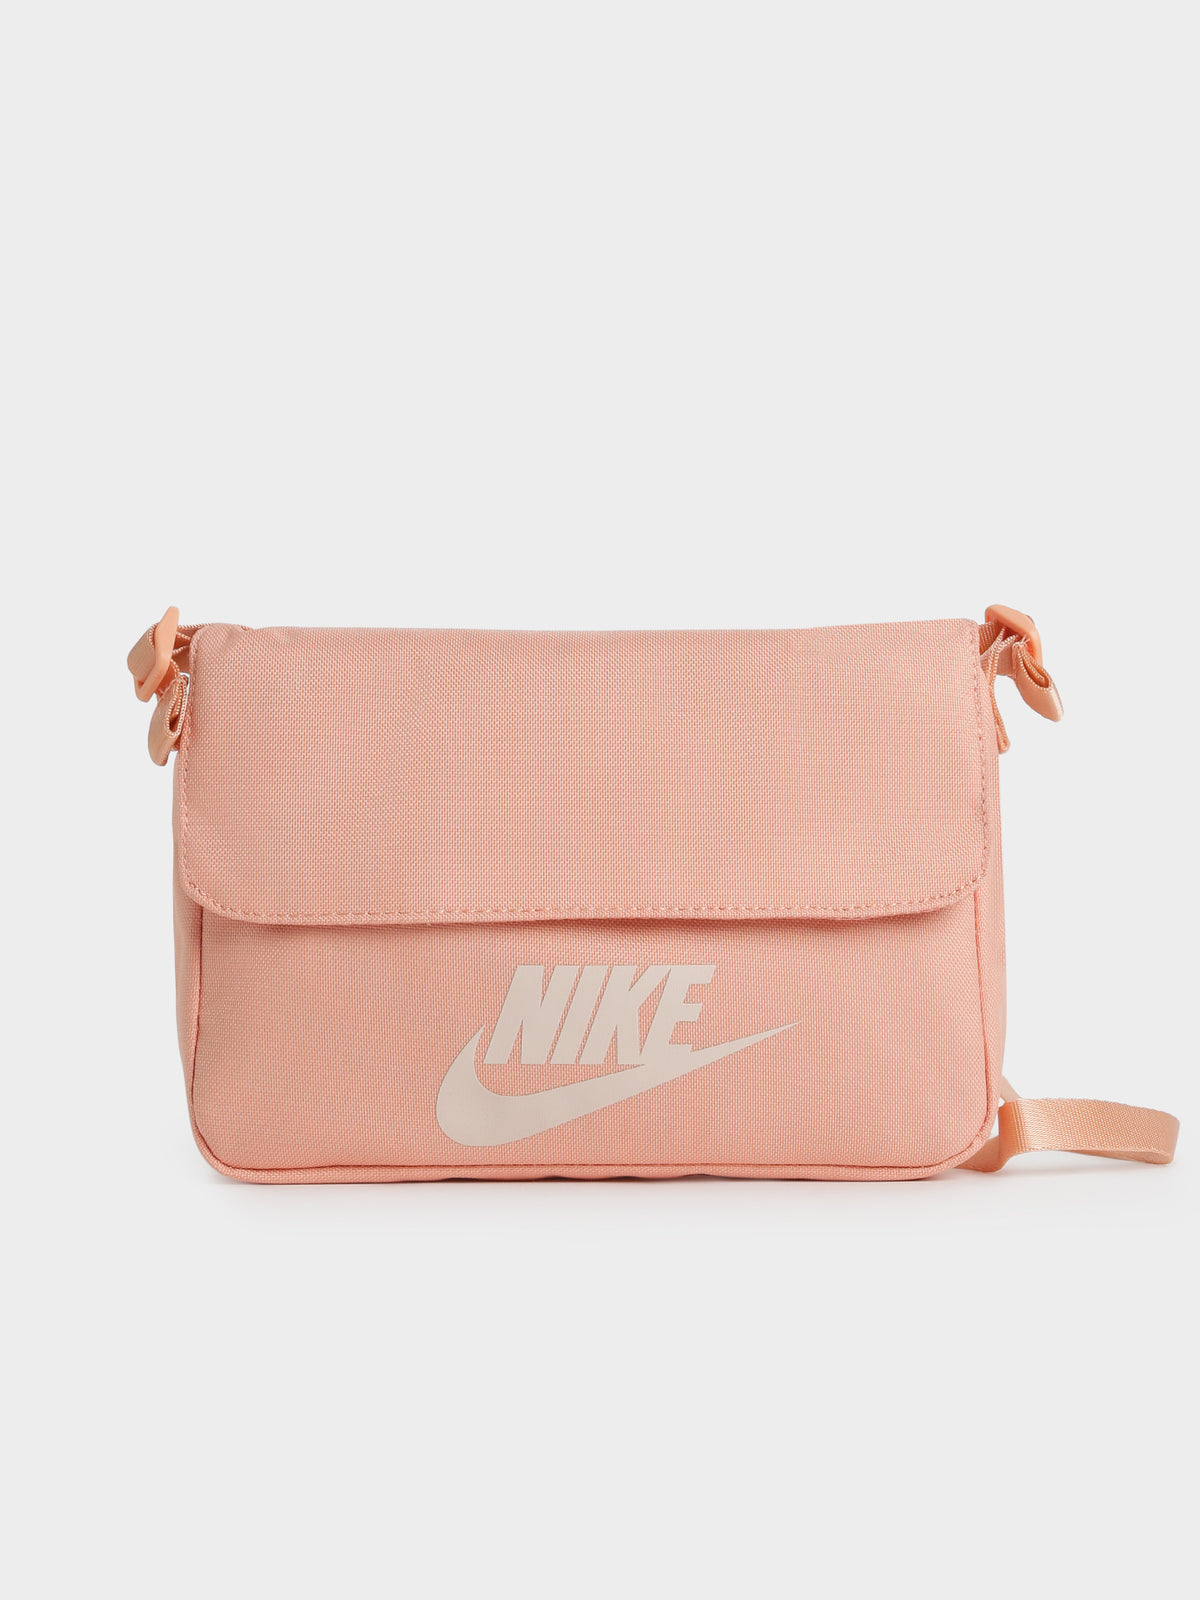 NSW Futra Sling Bag in Pink